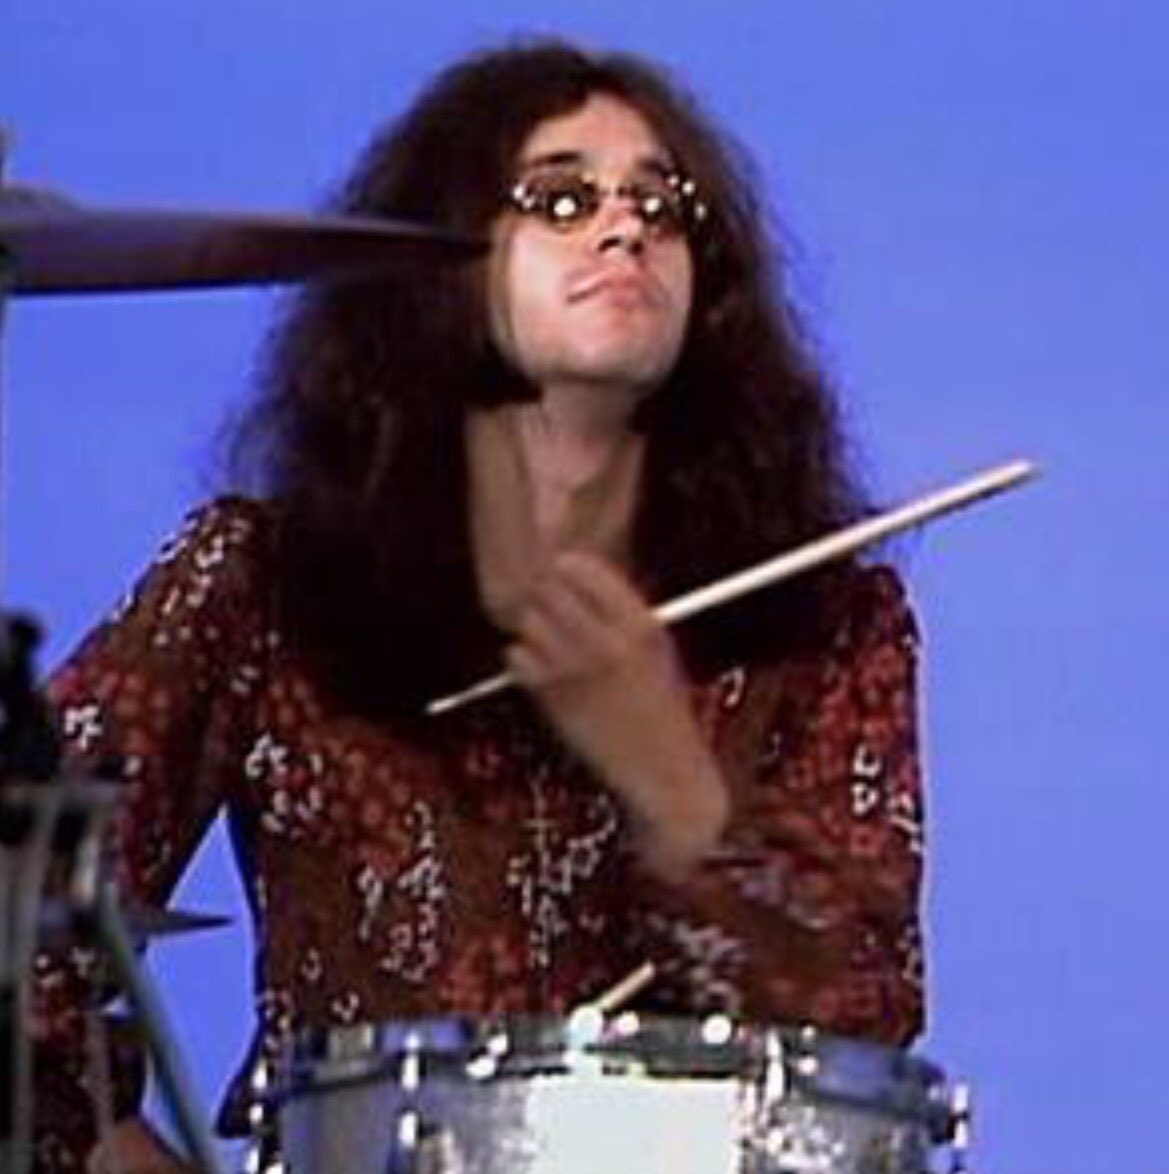 06/29/1948  Happy Birthday, Ian Paice , drummer, songwriter and producer of Deep Purple 